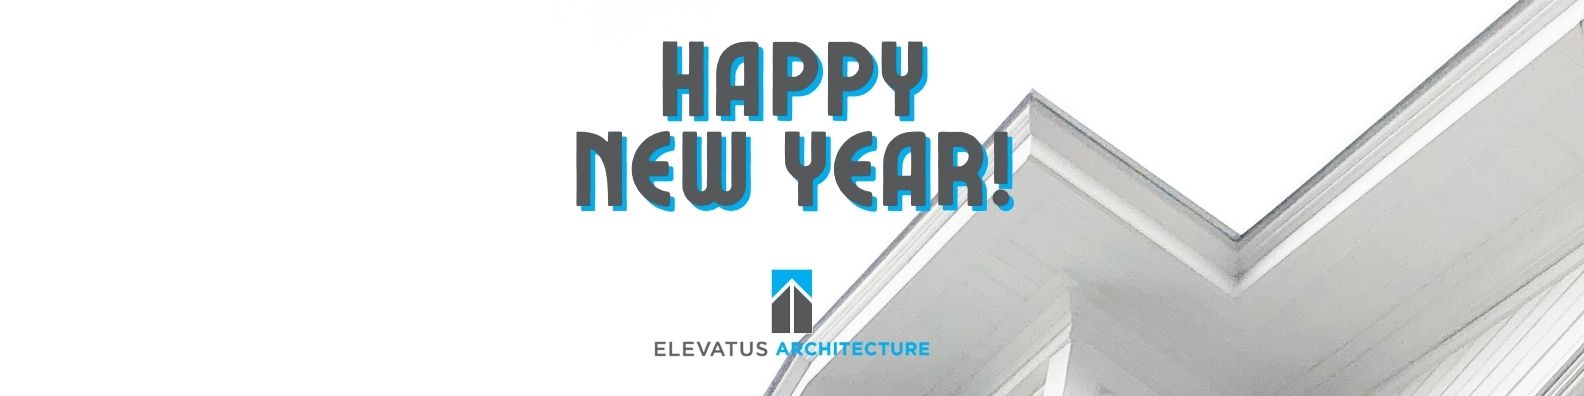 Happy New Year from Elevatus